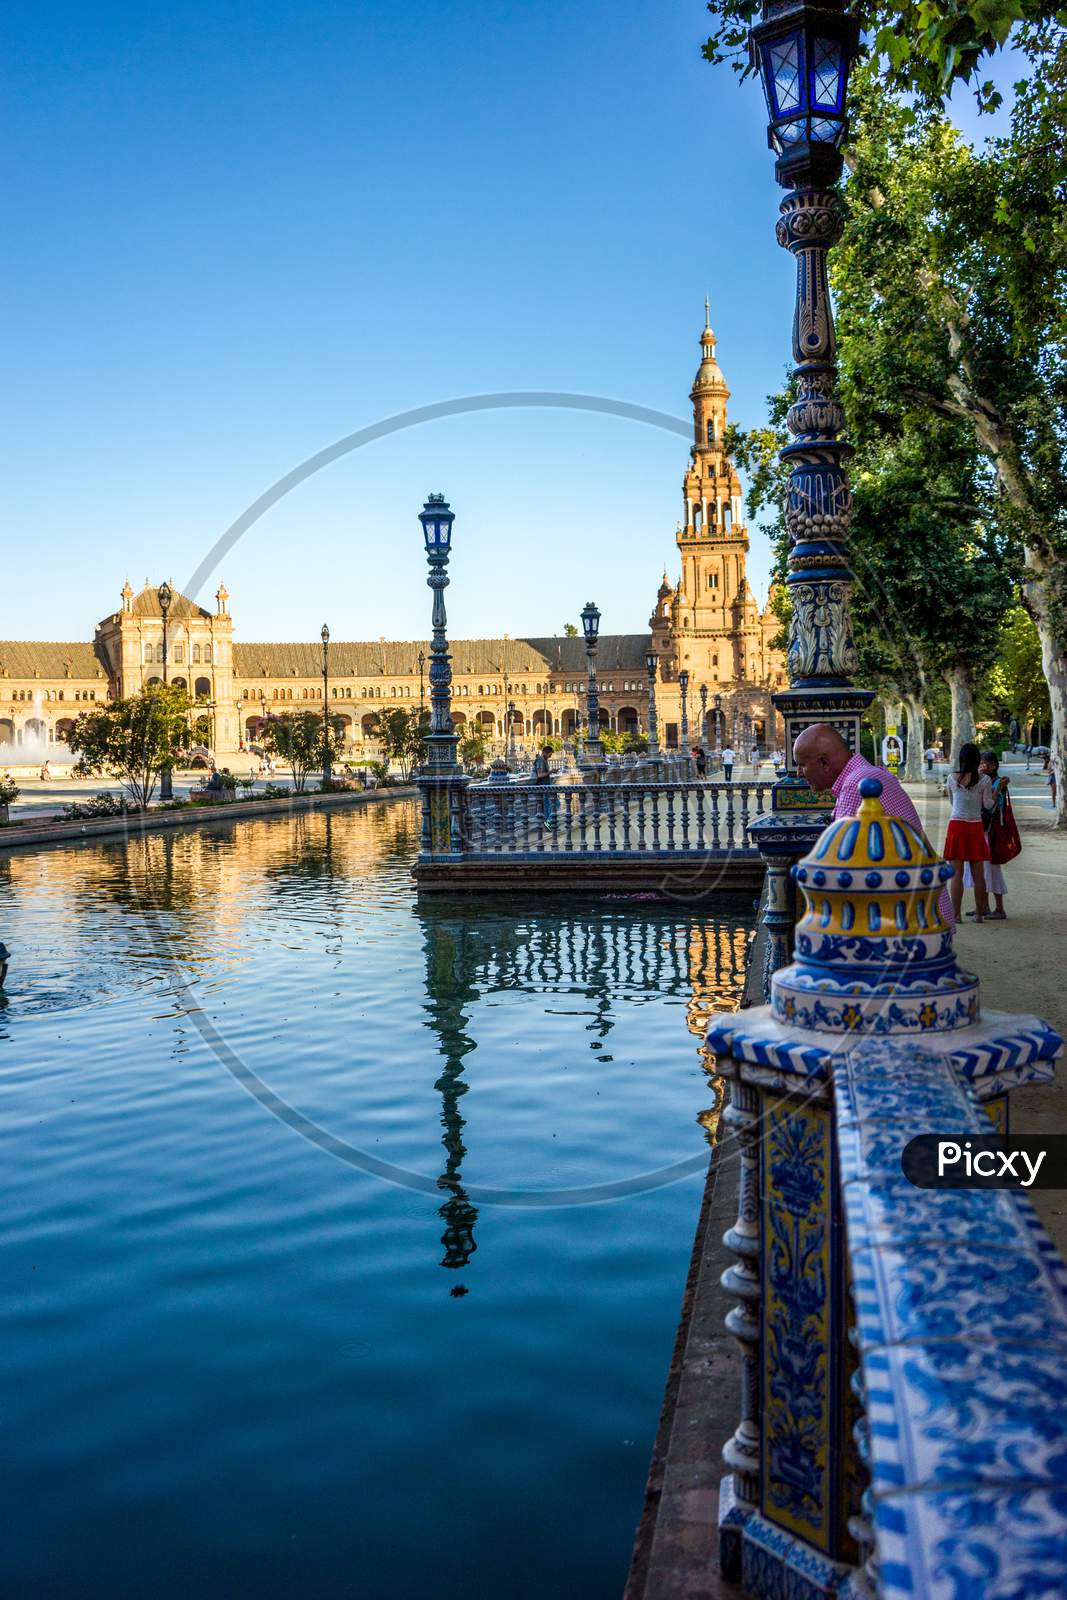 Seville, Spain- June 18, 2017 : People Gather Next To The Water Pond At The Plaza De Espana In Seville, Spain June 2017 On A Hot Summer Day.